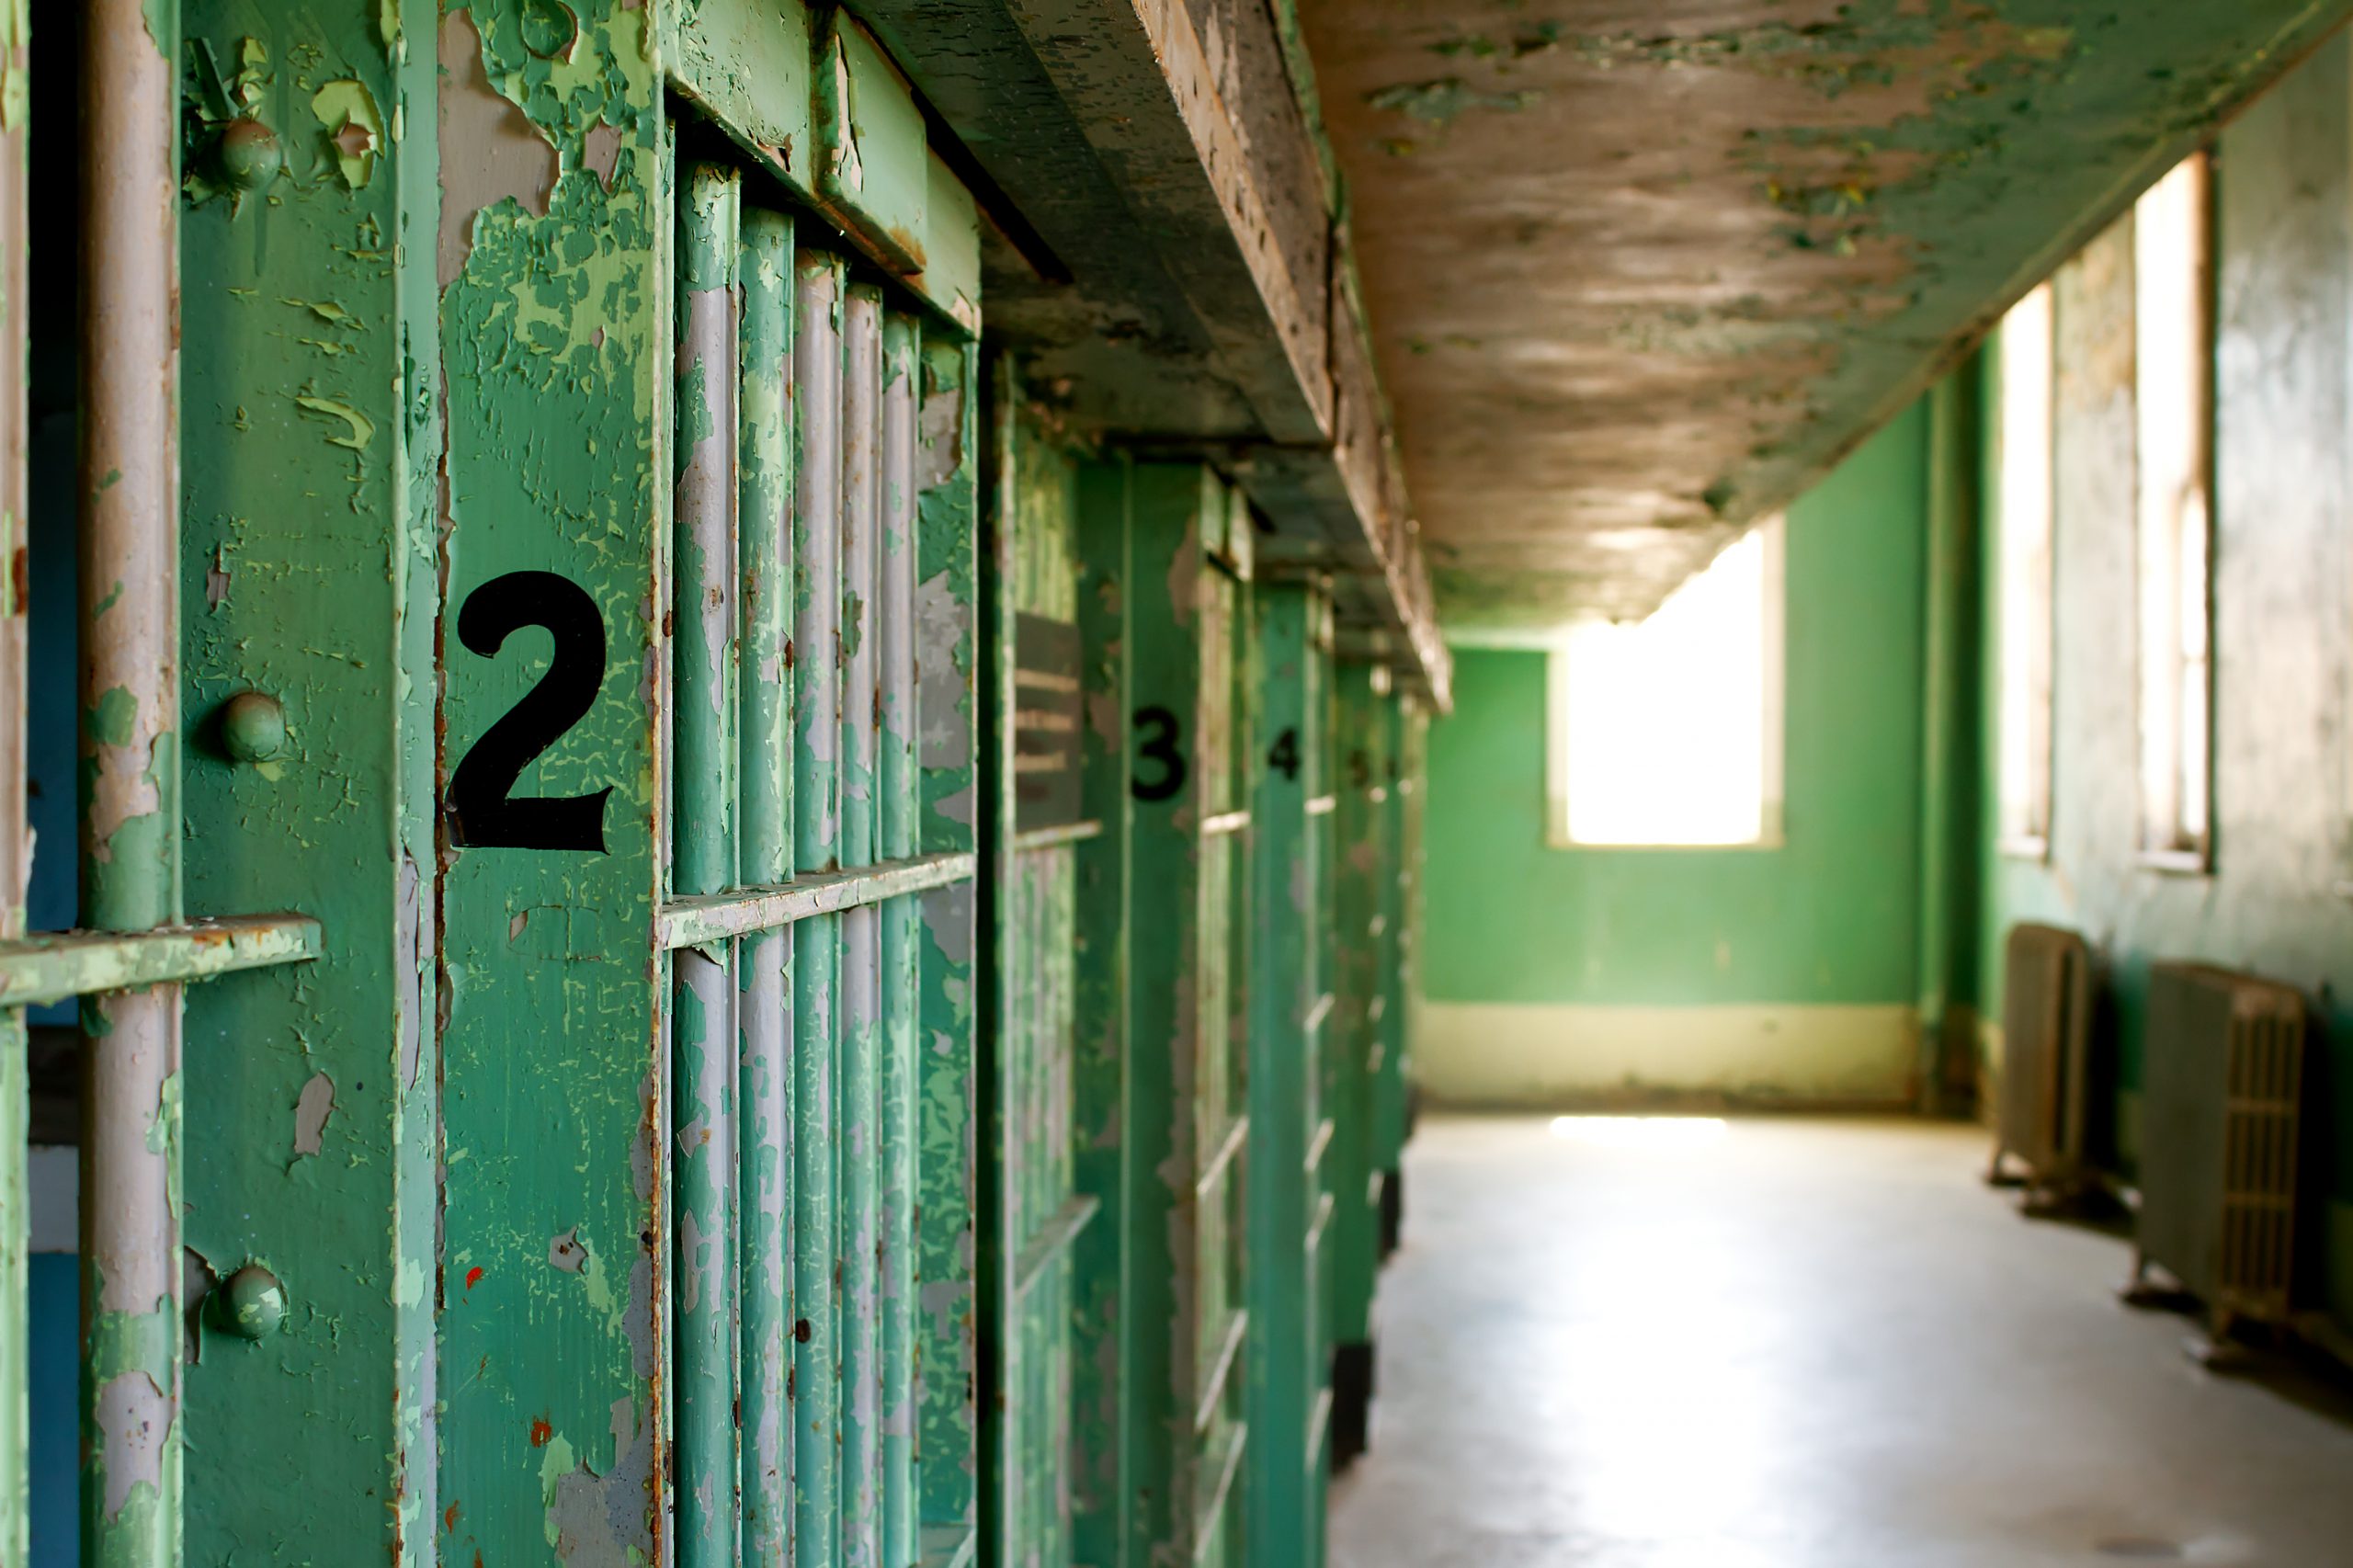 Should I Fear Other Incarcerated People?